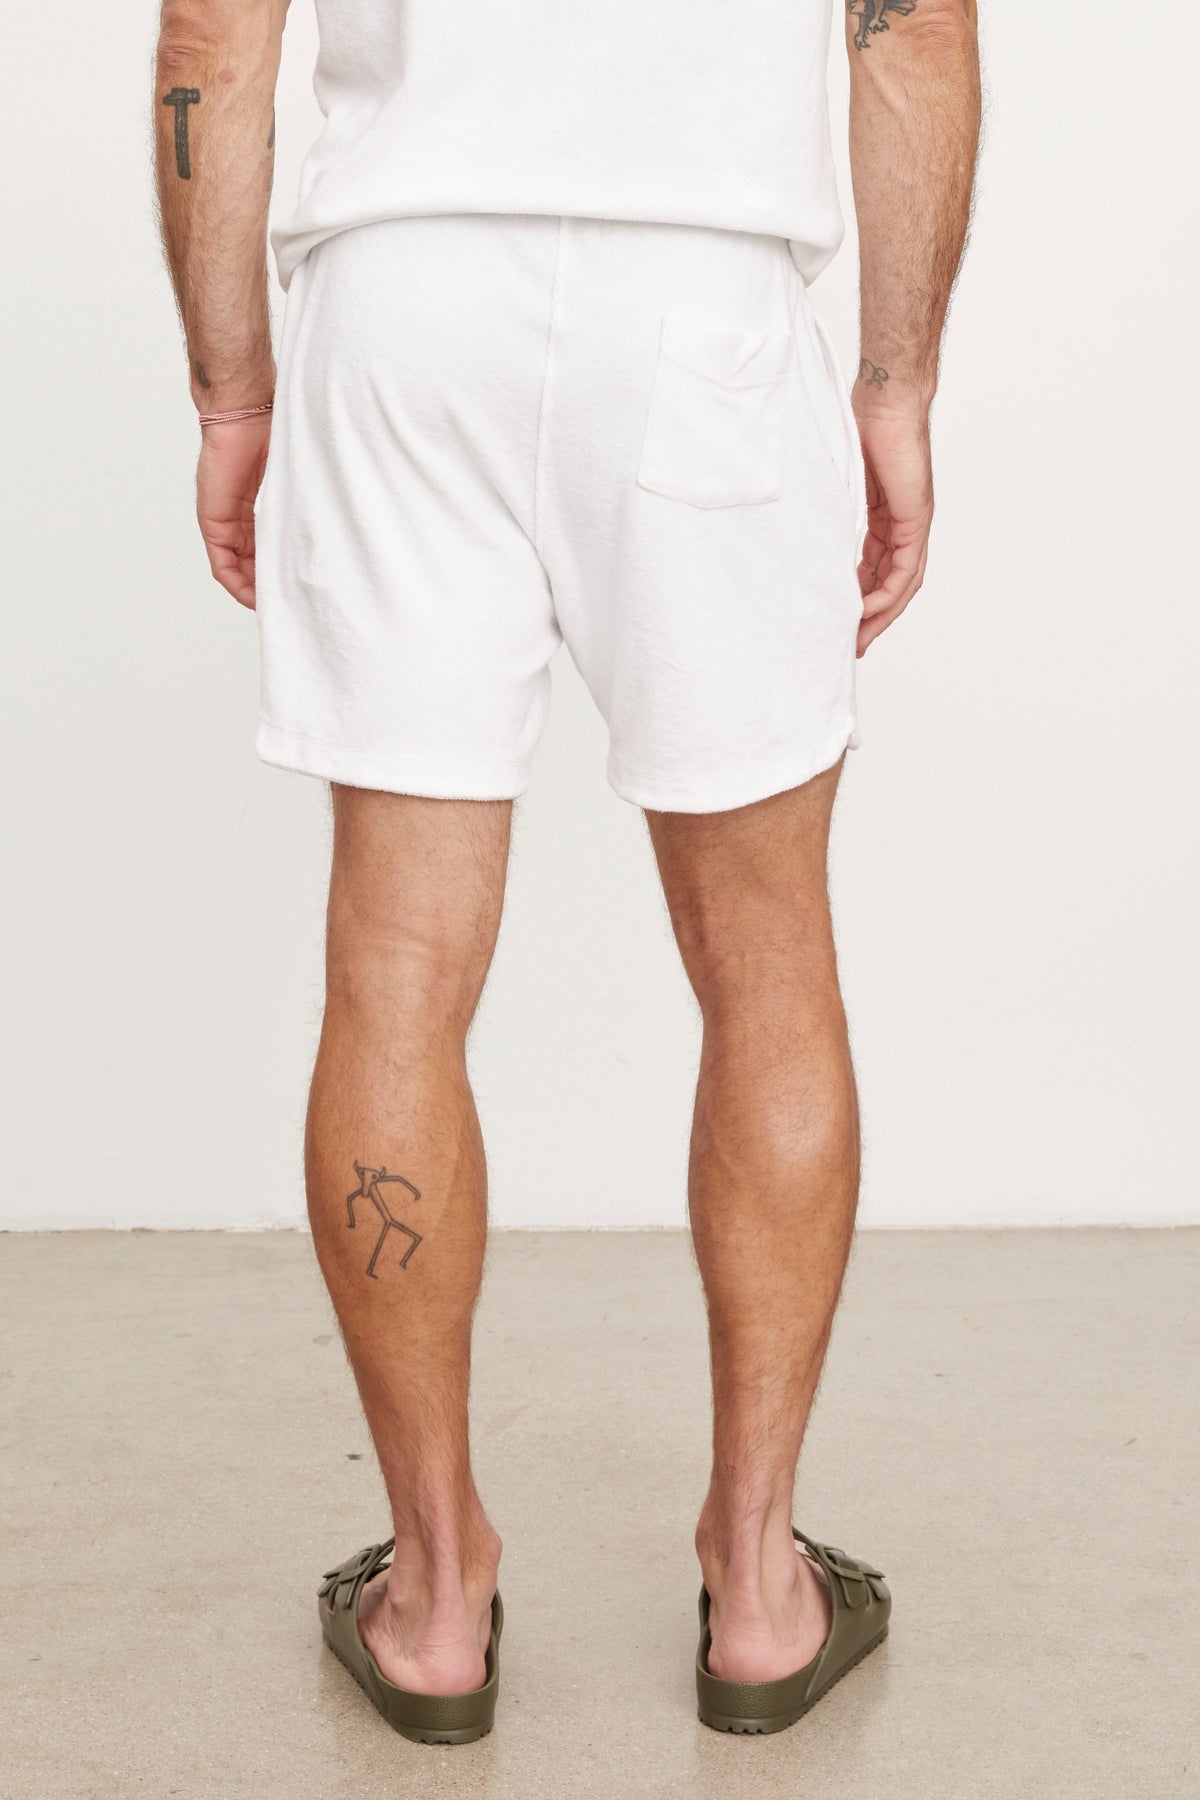   Man standing in white cotton terry cloth SALEM SHORTS by Velvet by Graham & Spencer with a back view, showcasing a tattoo on his left calf and wearing green flip-flops. 